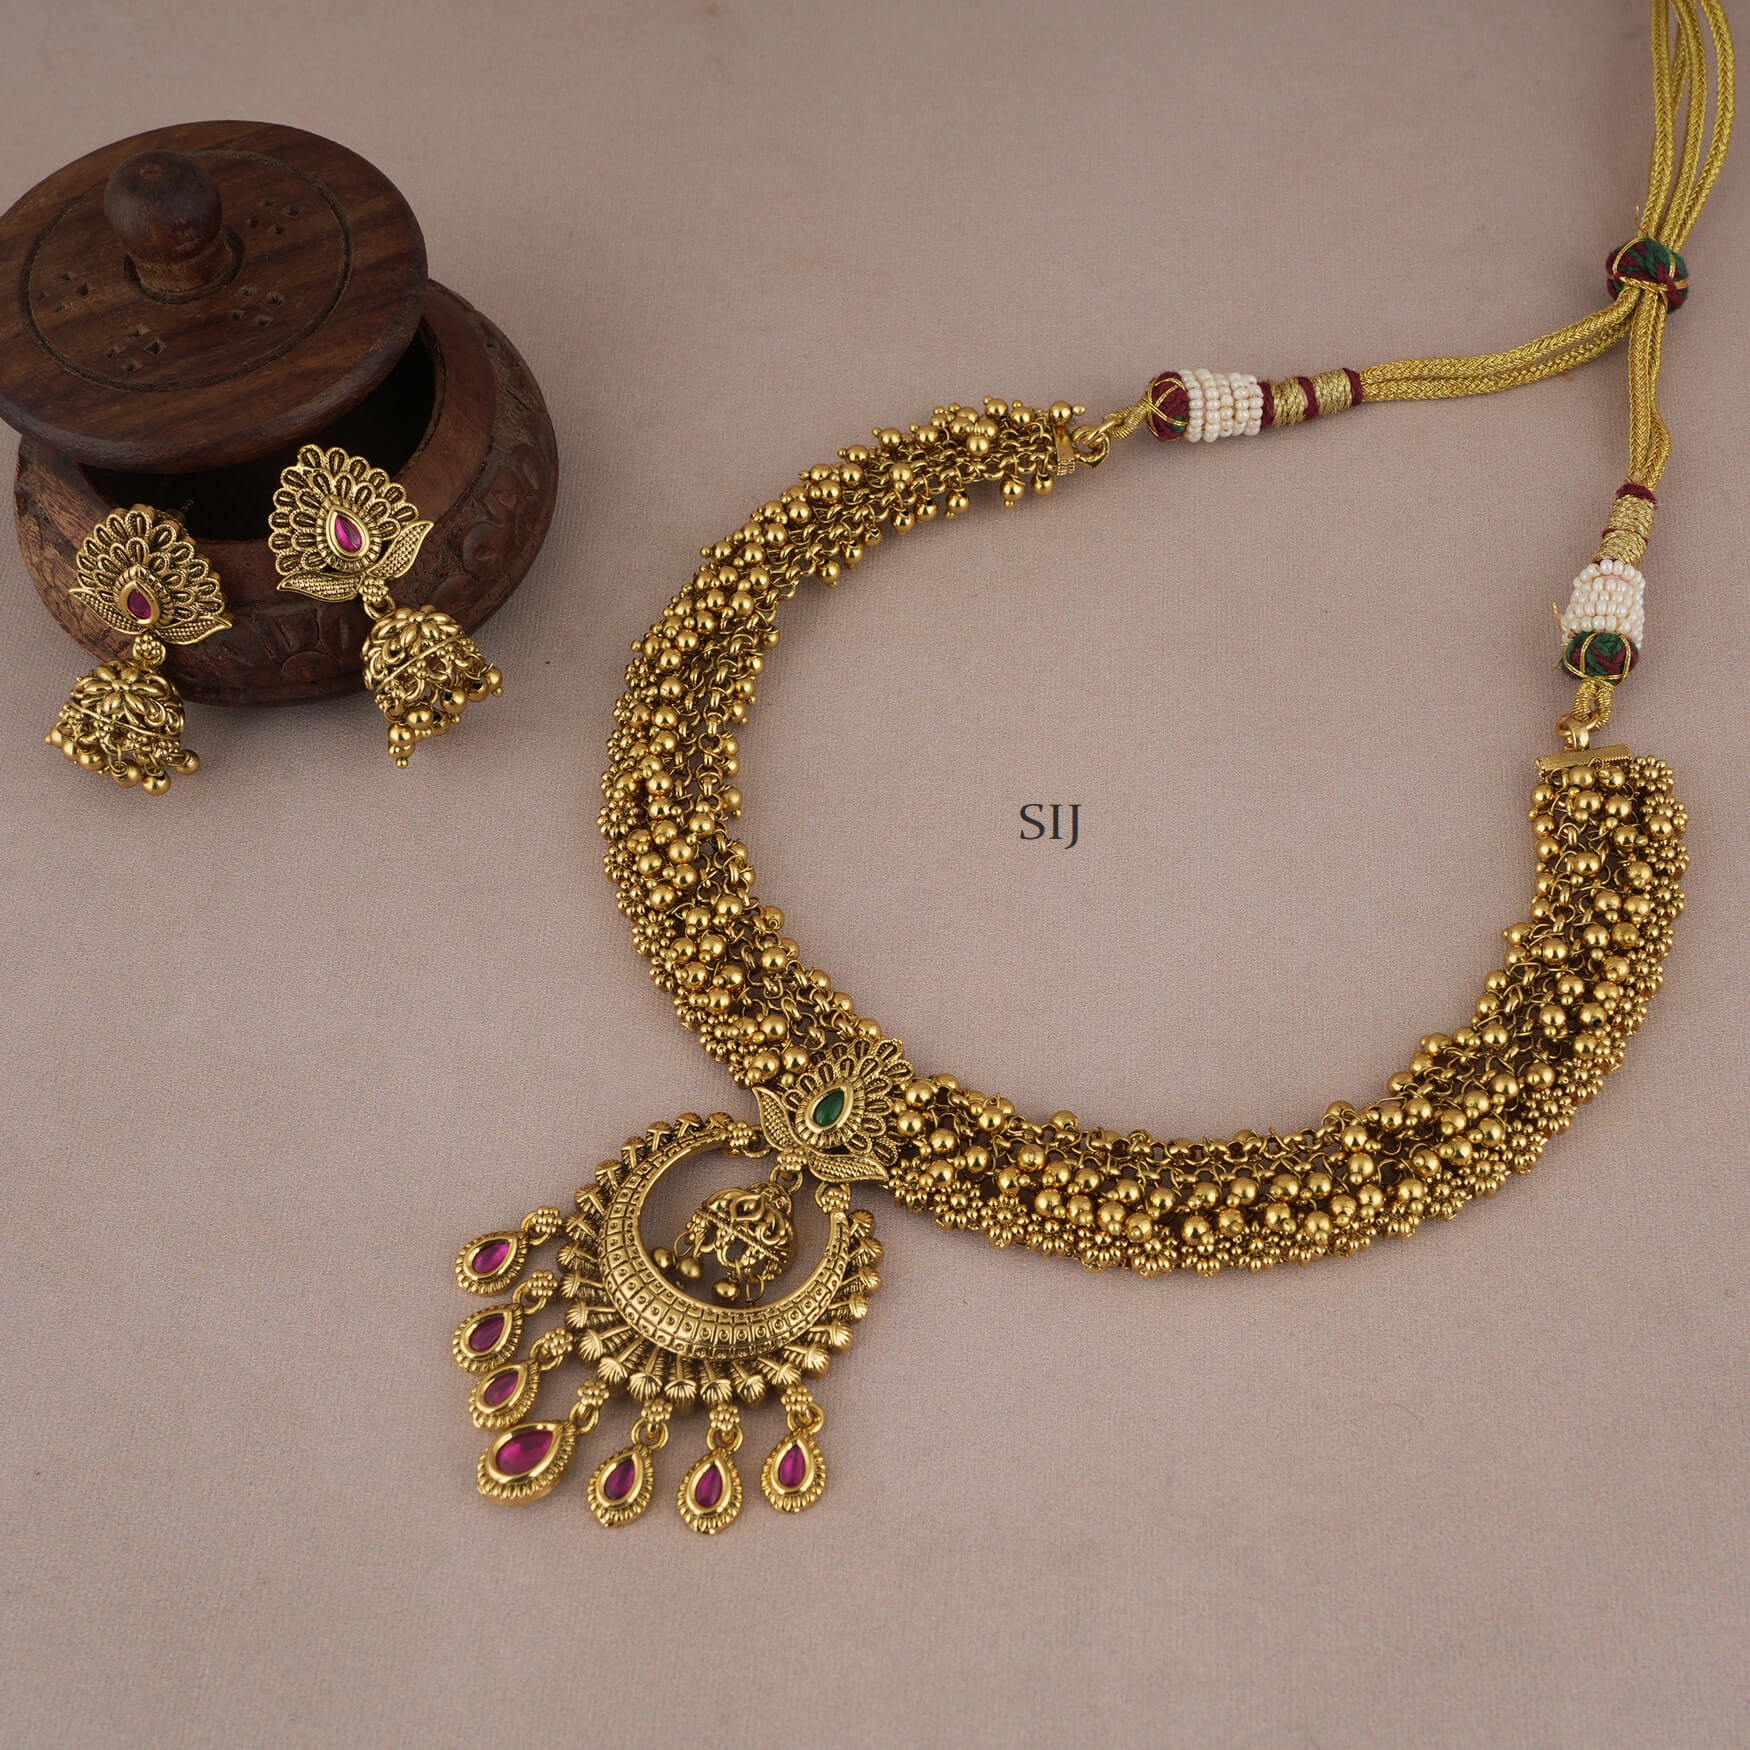 Attractive Small Gold Beads Necklace Set